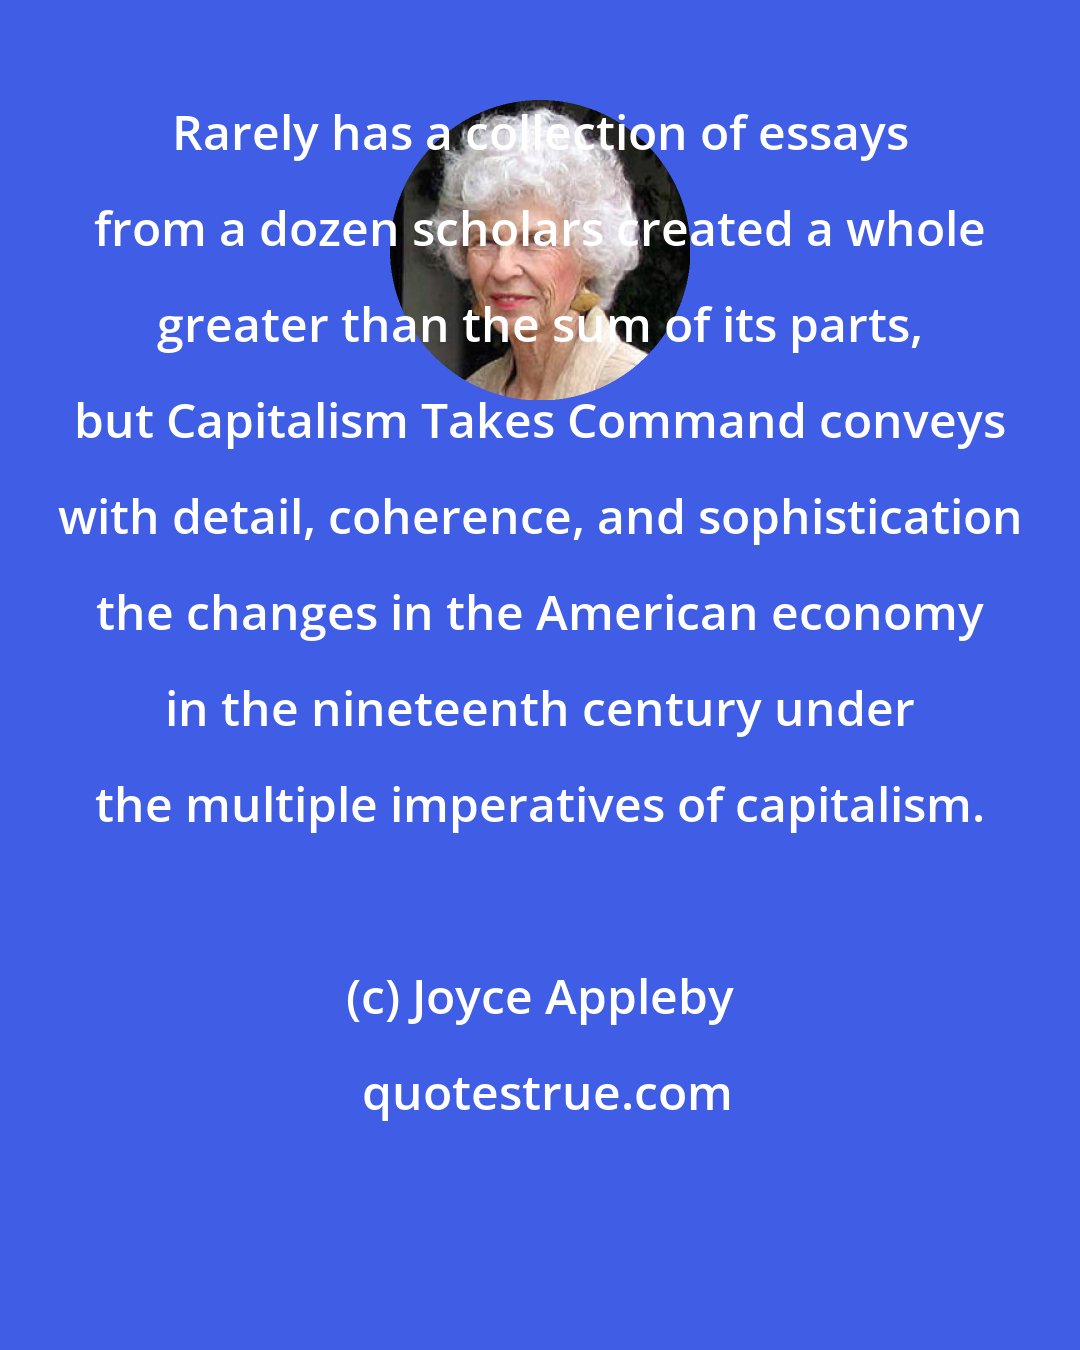 Joyce Appleby: Rarely has a collection of essays from a dozen scholars created a whole greater than the sum of its parts, but Capitalism Takes Command conveys with detail, coherence, and sophistication the changes in the American economy in the nineteenth century under the multiple imperatives of capitalism.